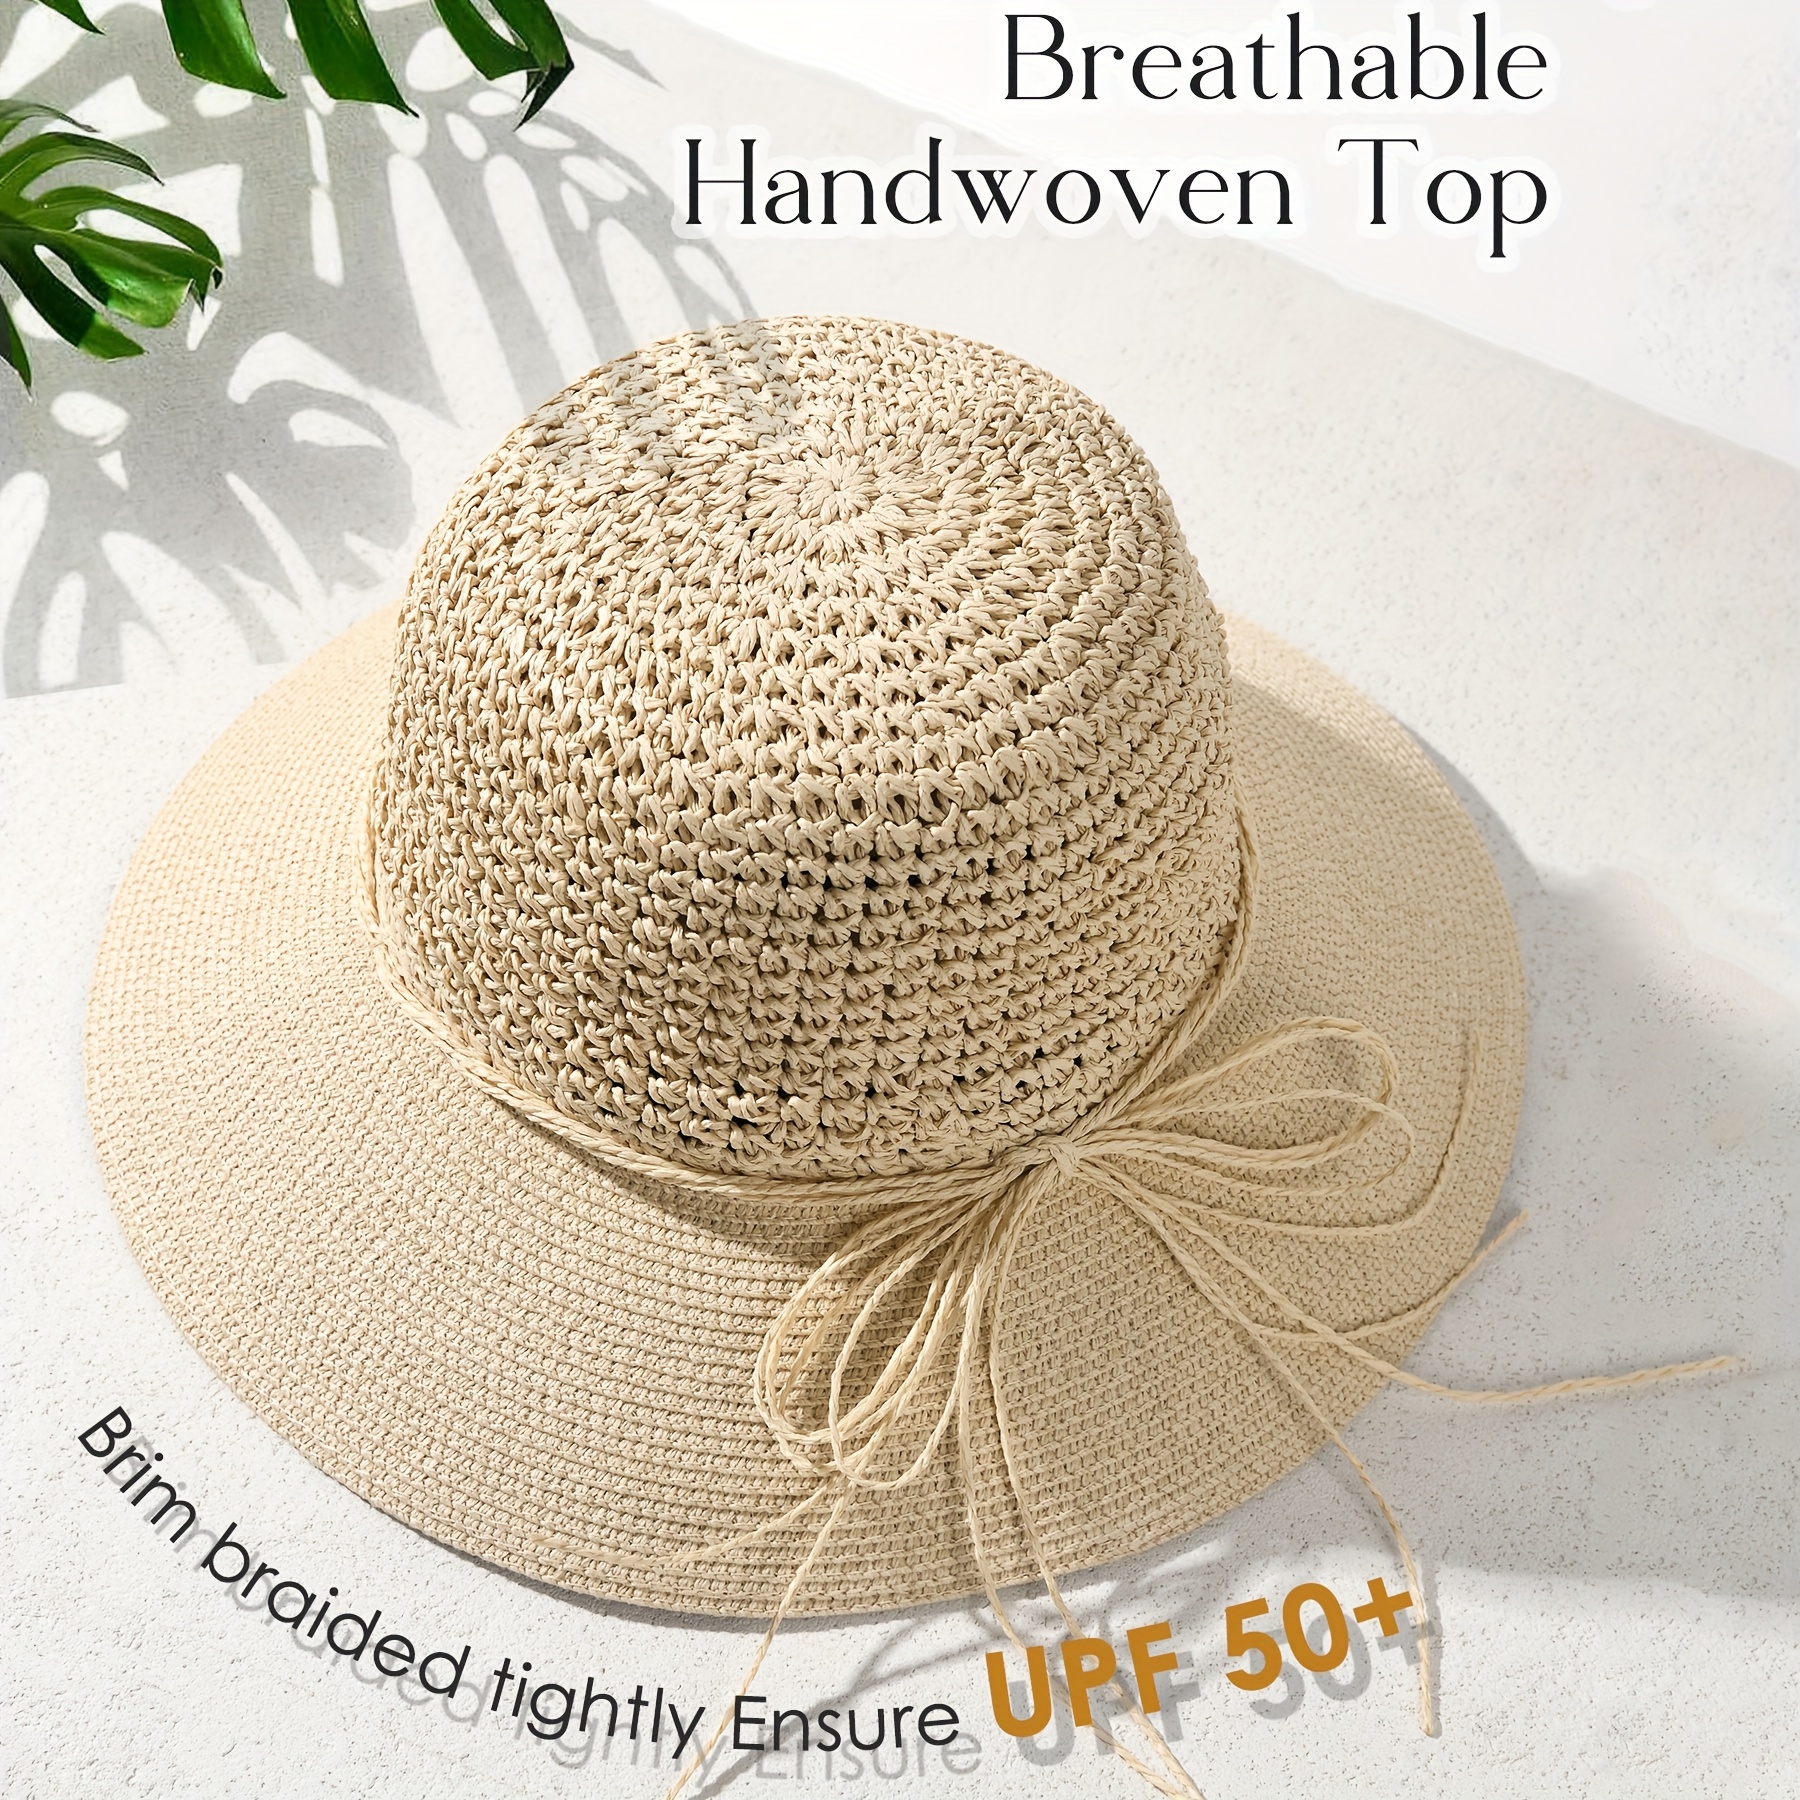 1pc Sun Hats For Men Women Wide Brim Handmade Straw Beach Hat Brearhable  And Foldable Packable For Travel, High-quality & Affordable